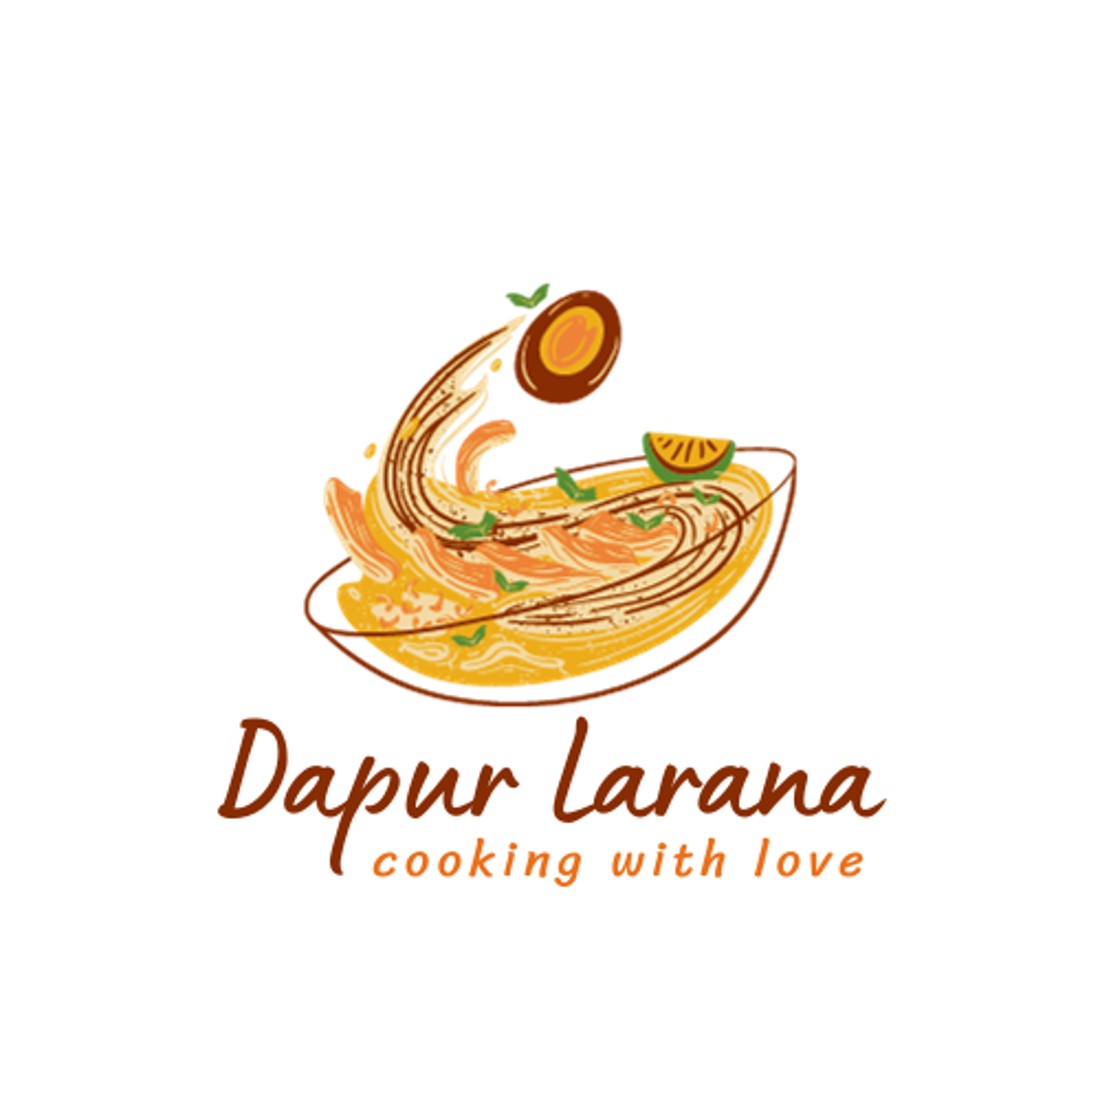 Templates for your food newly opened resturants, If wanna change the name of the store tell me plzz cover image.